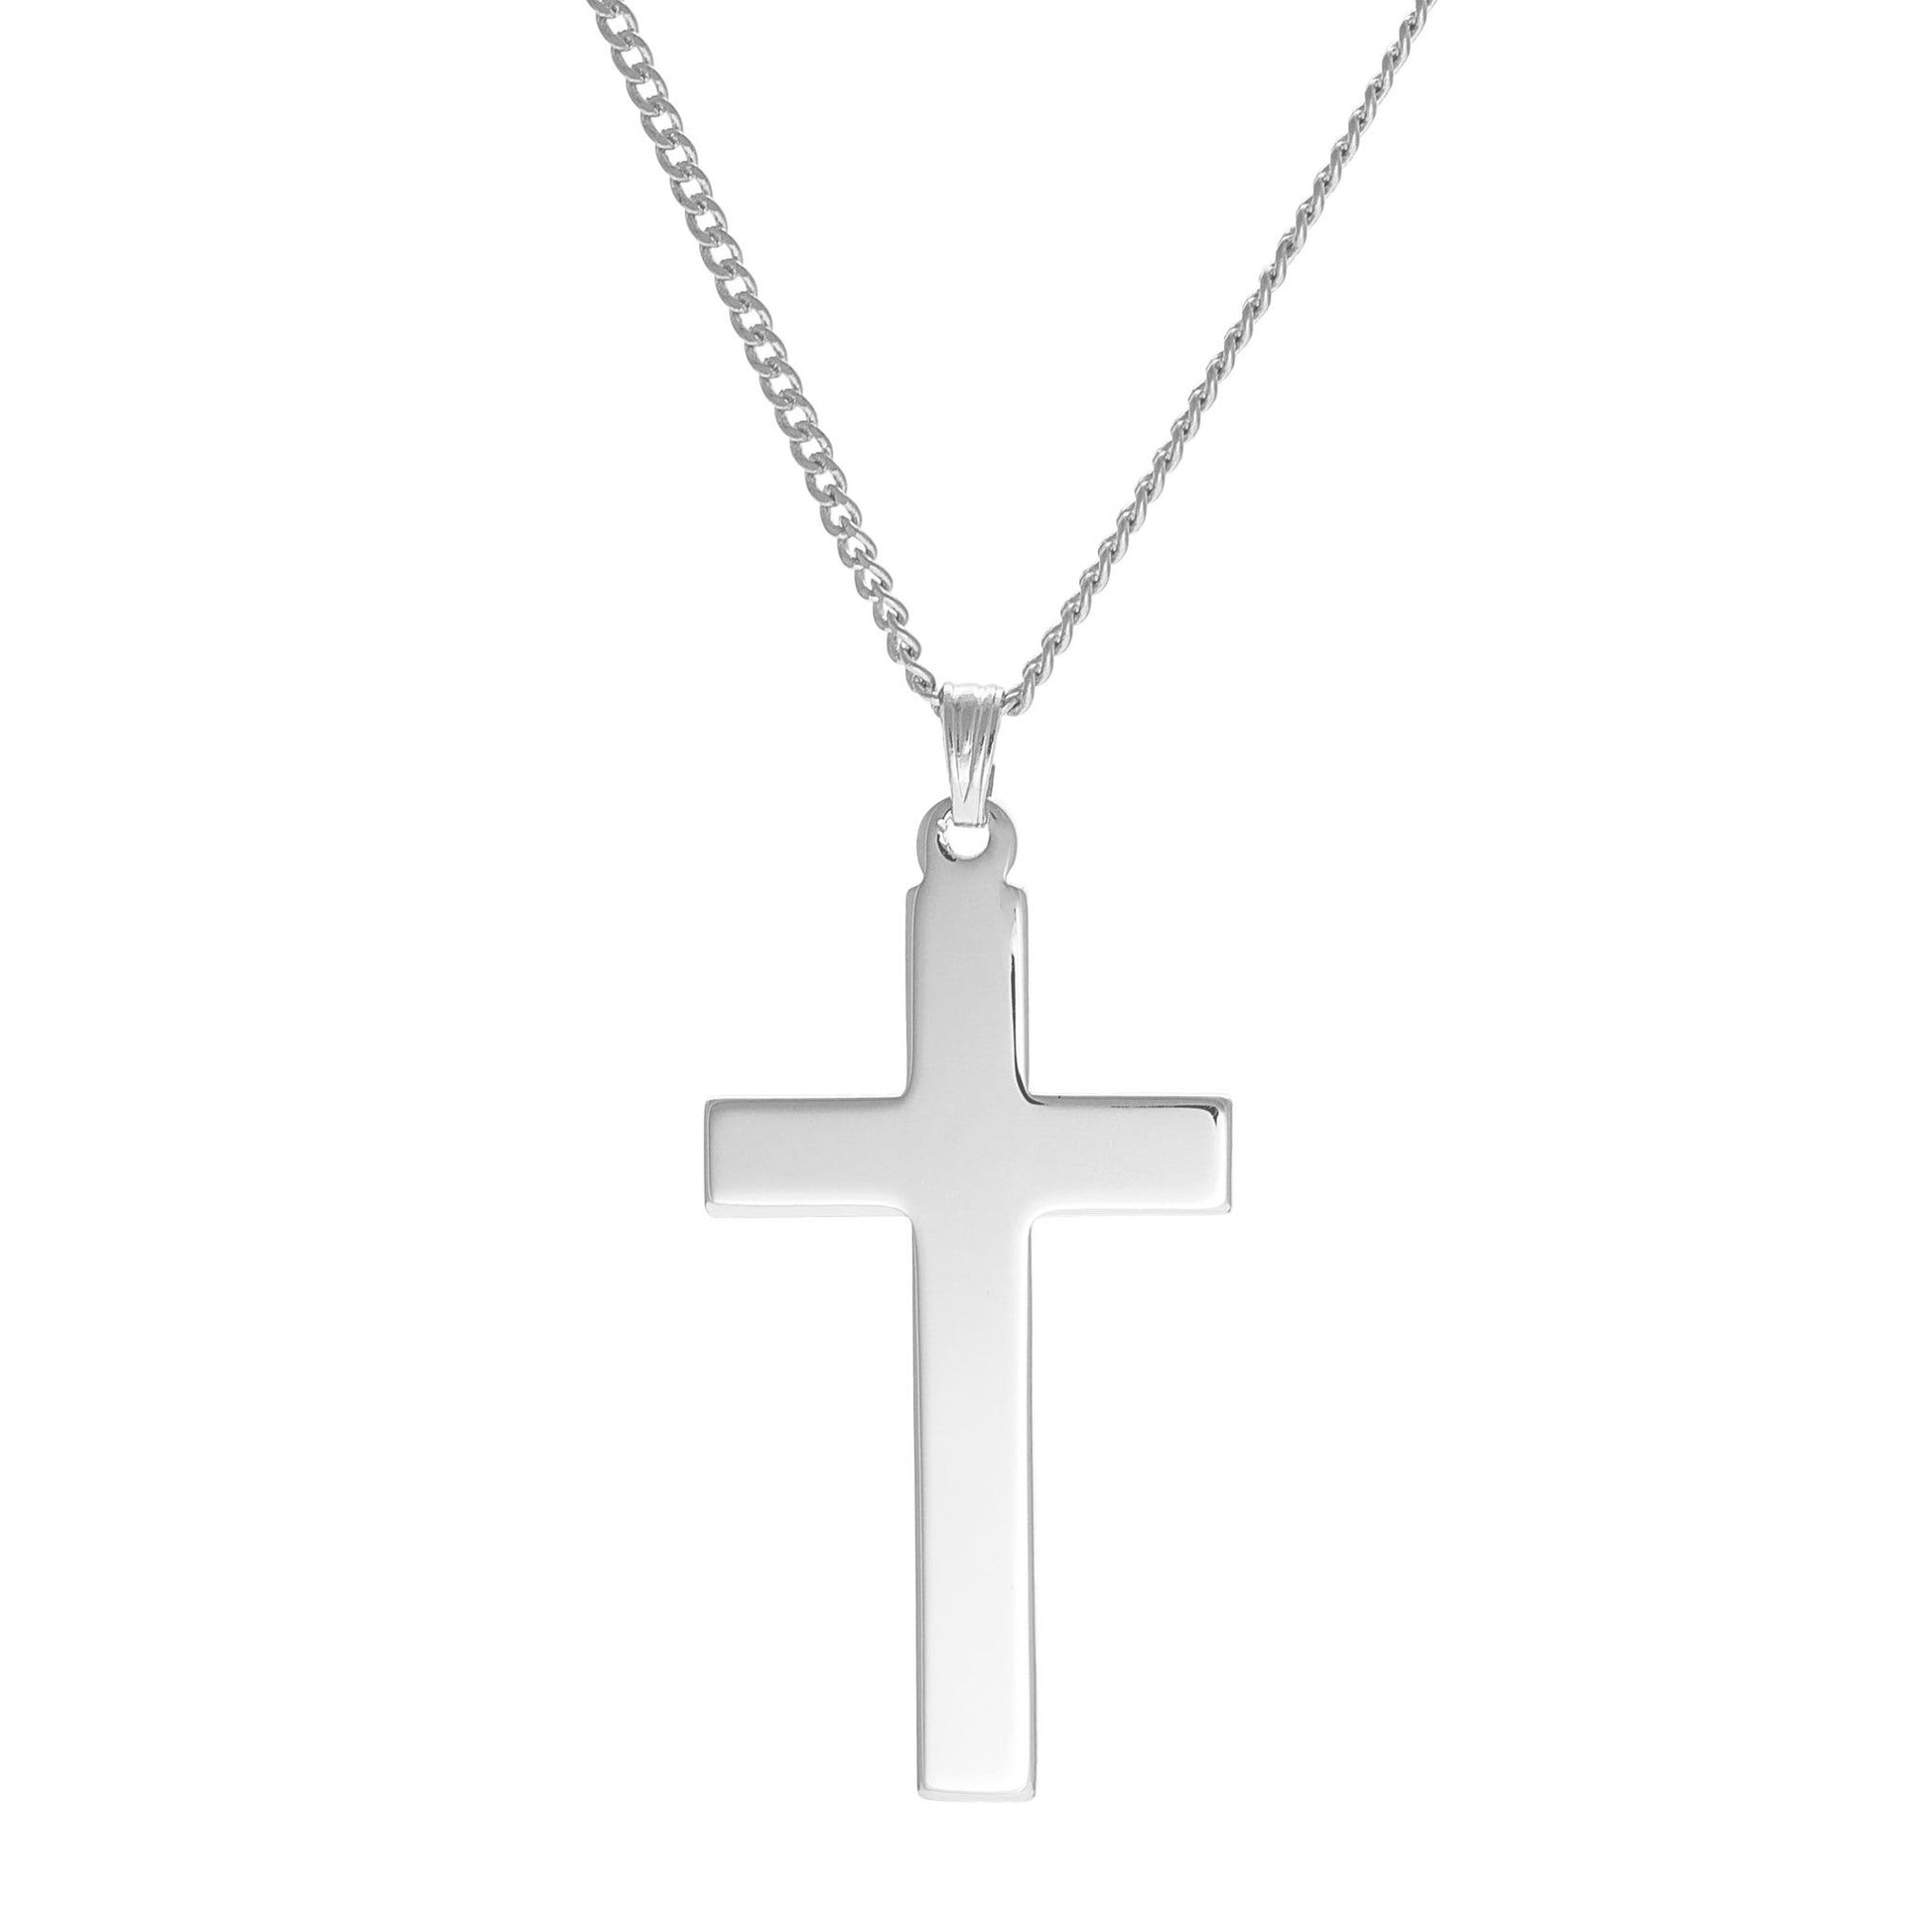 A plain polished cross necklace displayed on a neutral white background.